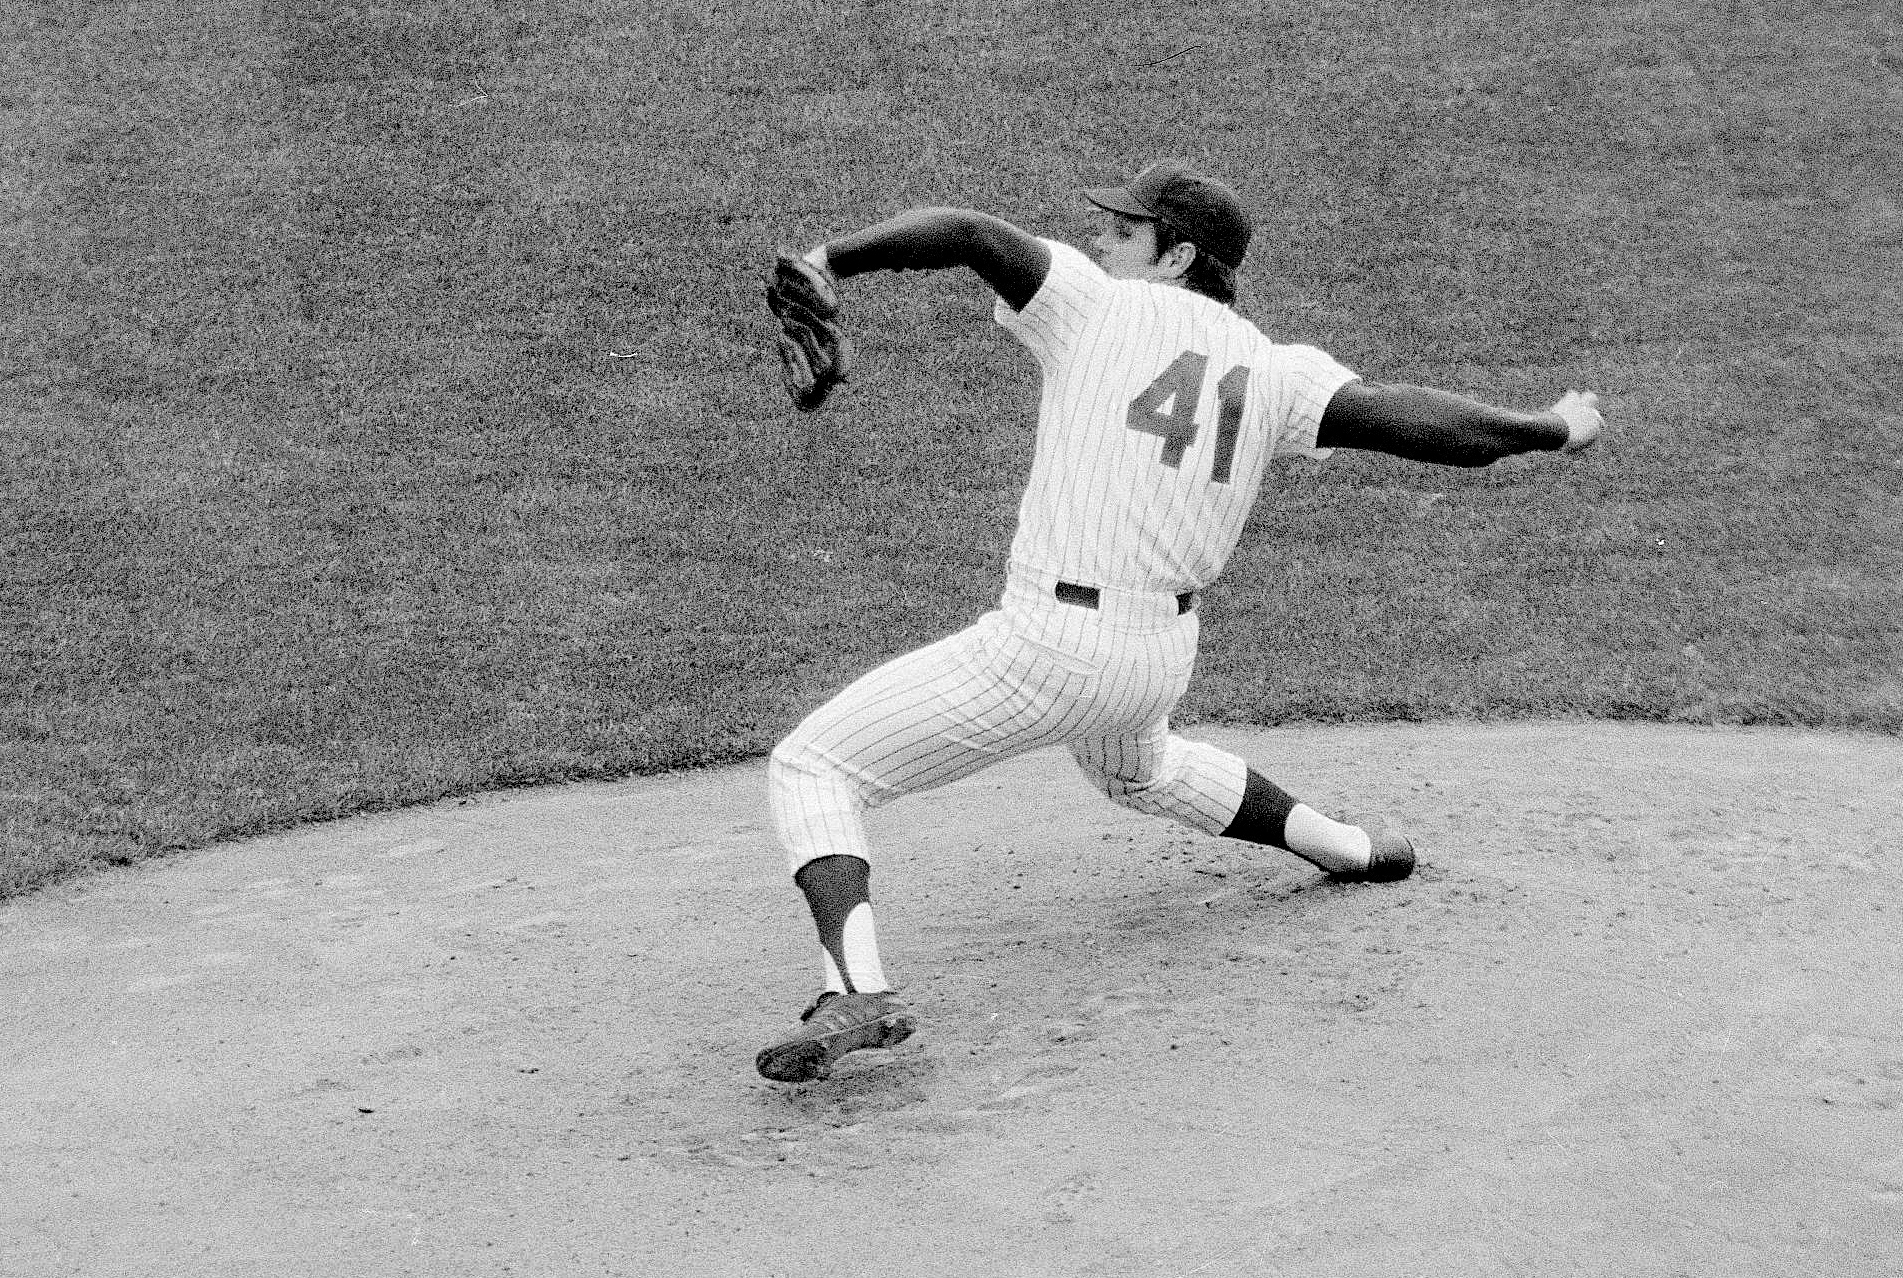 New York Mets legend Tom Seaver dies at 75 after battle with